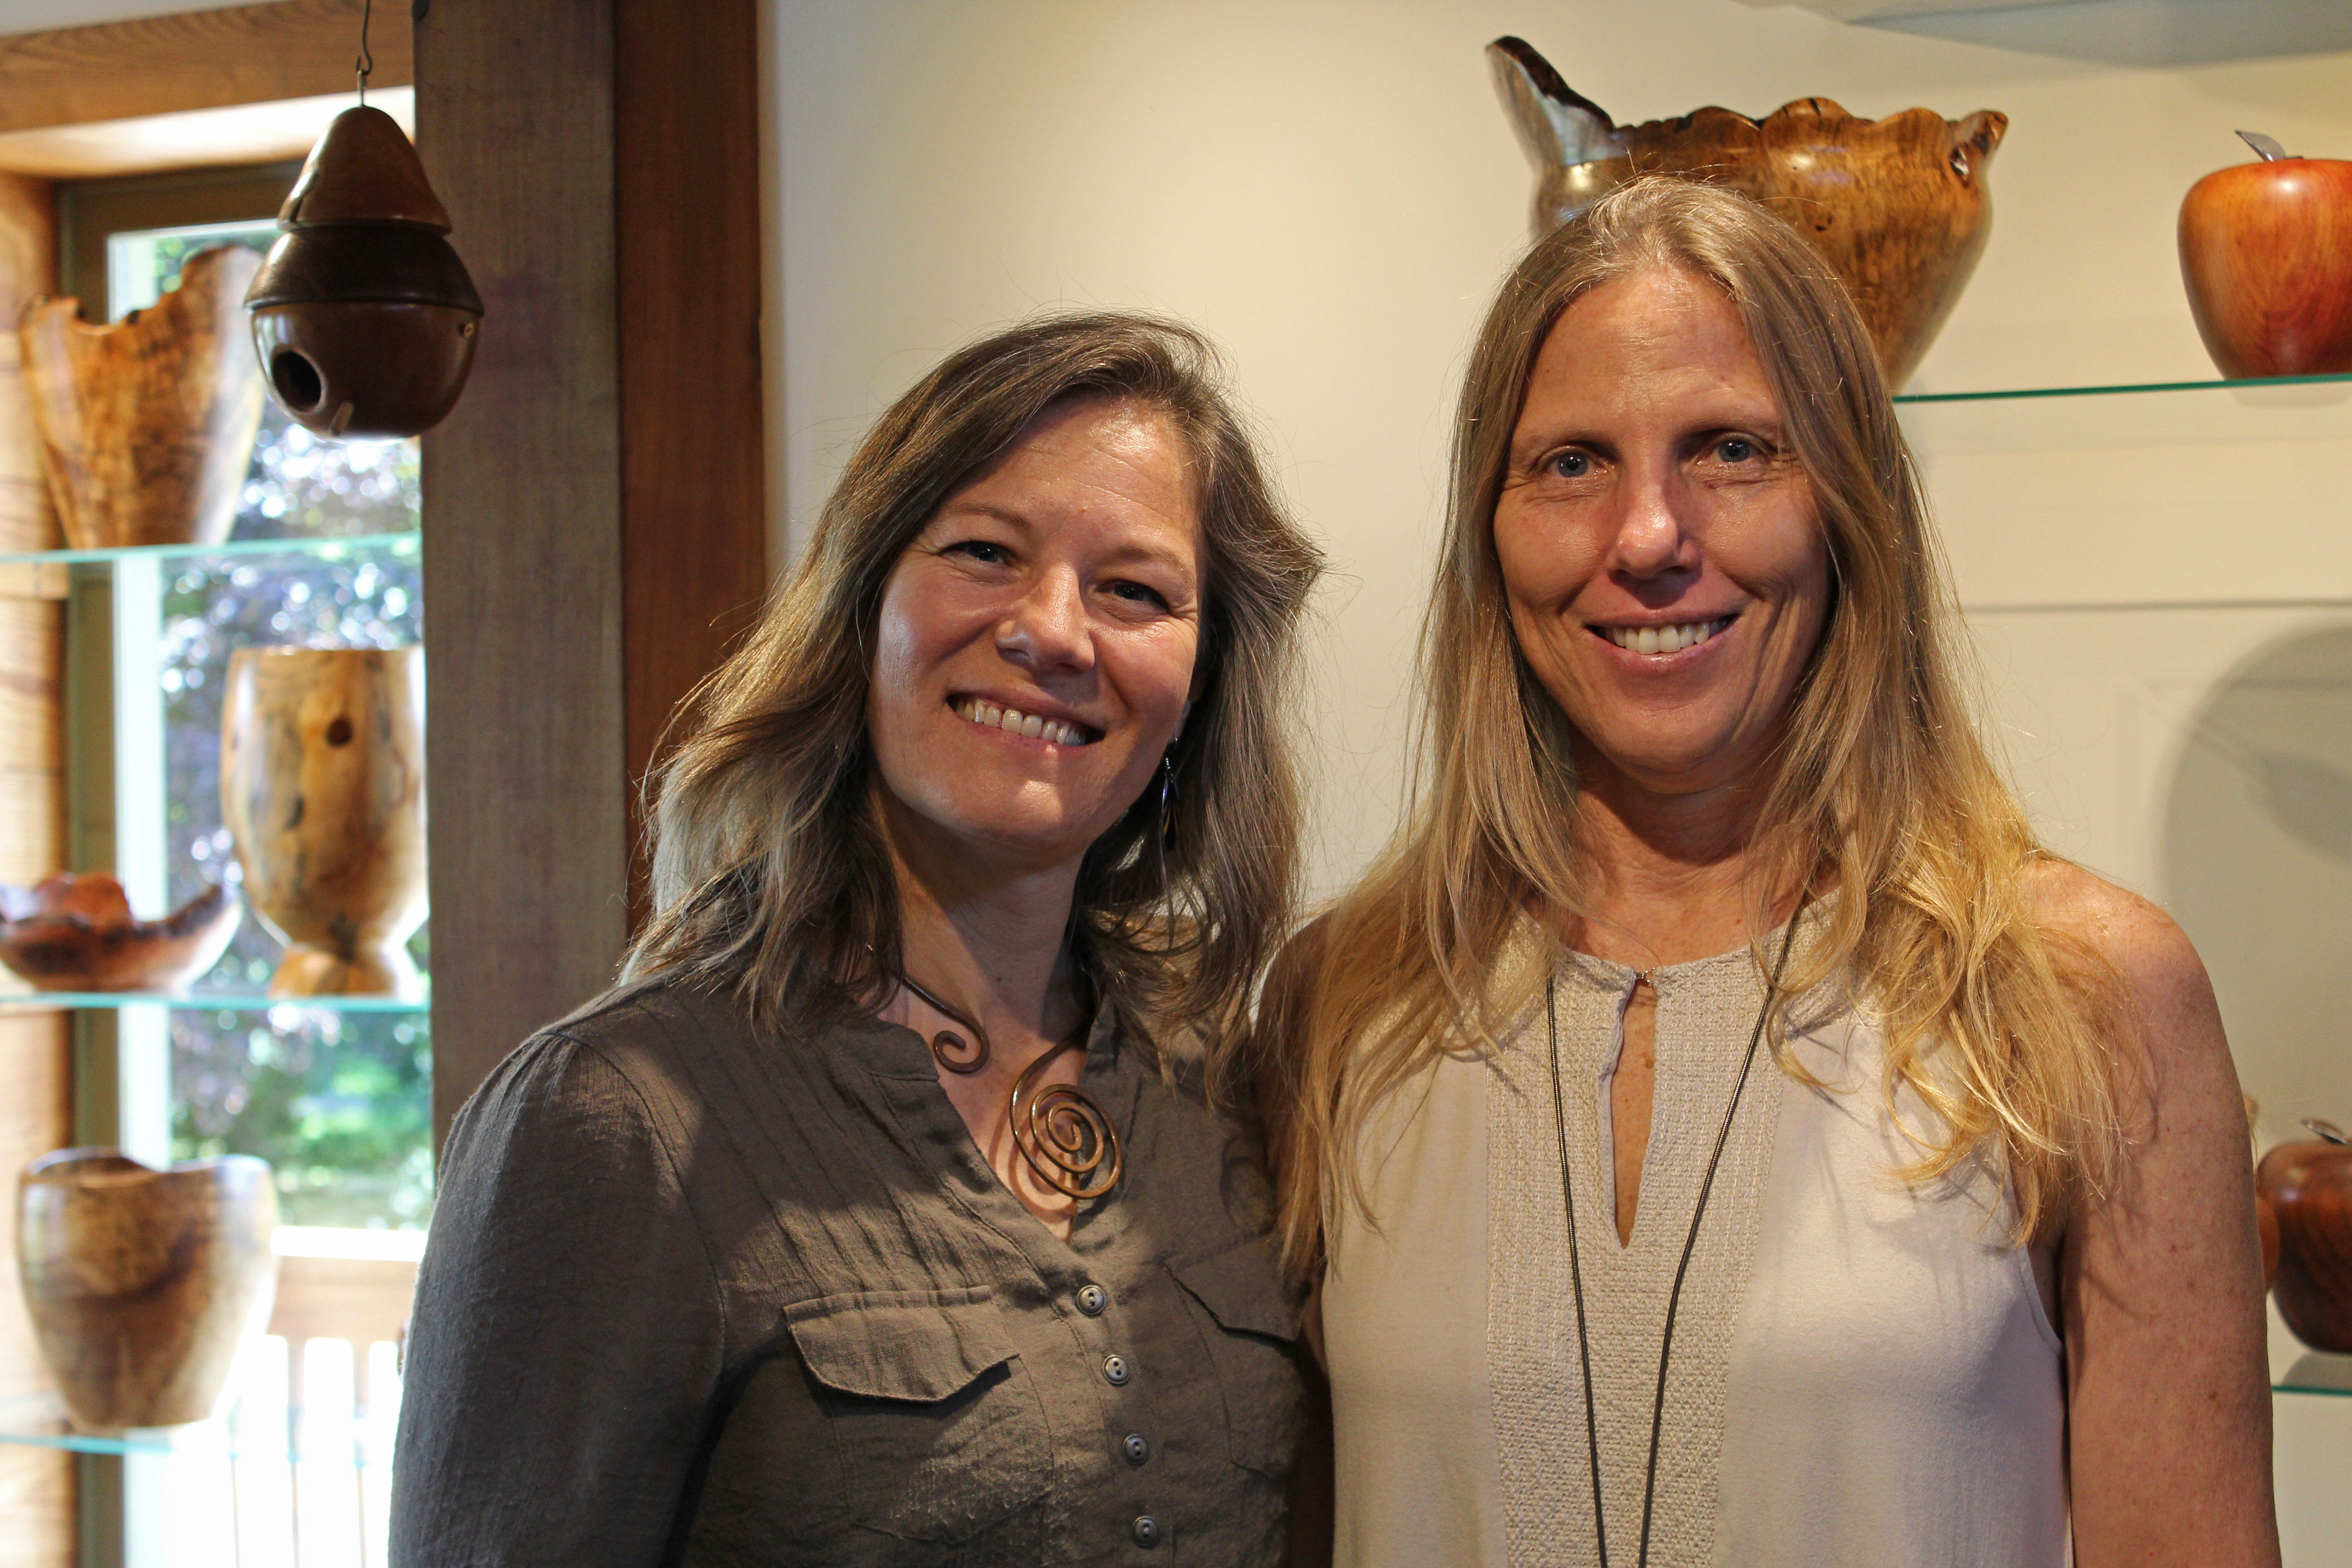 Sweetgrass Artisan Mercantile co-owners Jessica Charapata (left) and Melissa Andersen (right) smile and pose for a photo inside of their new gallery in Bakersville. (MNJ photo/Juliana Walker)